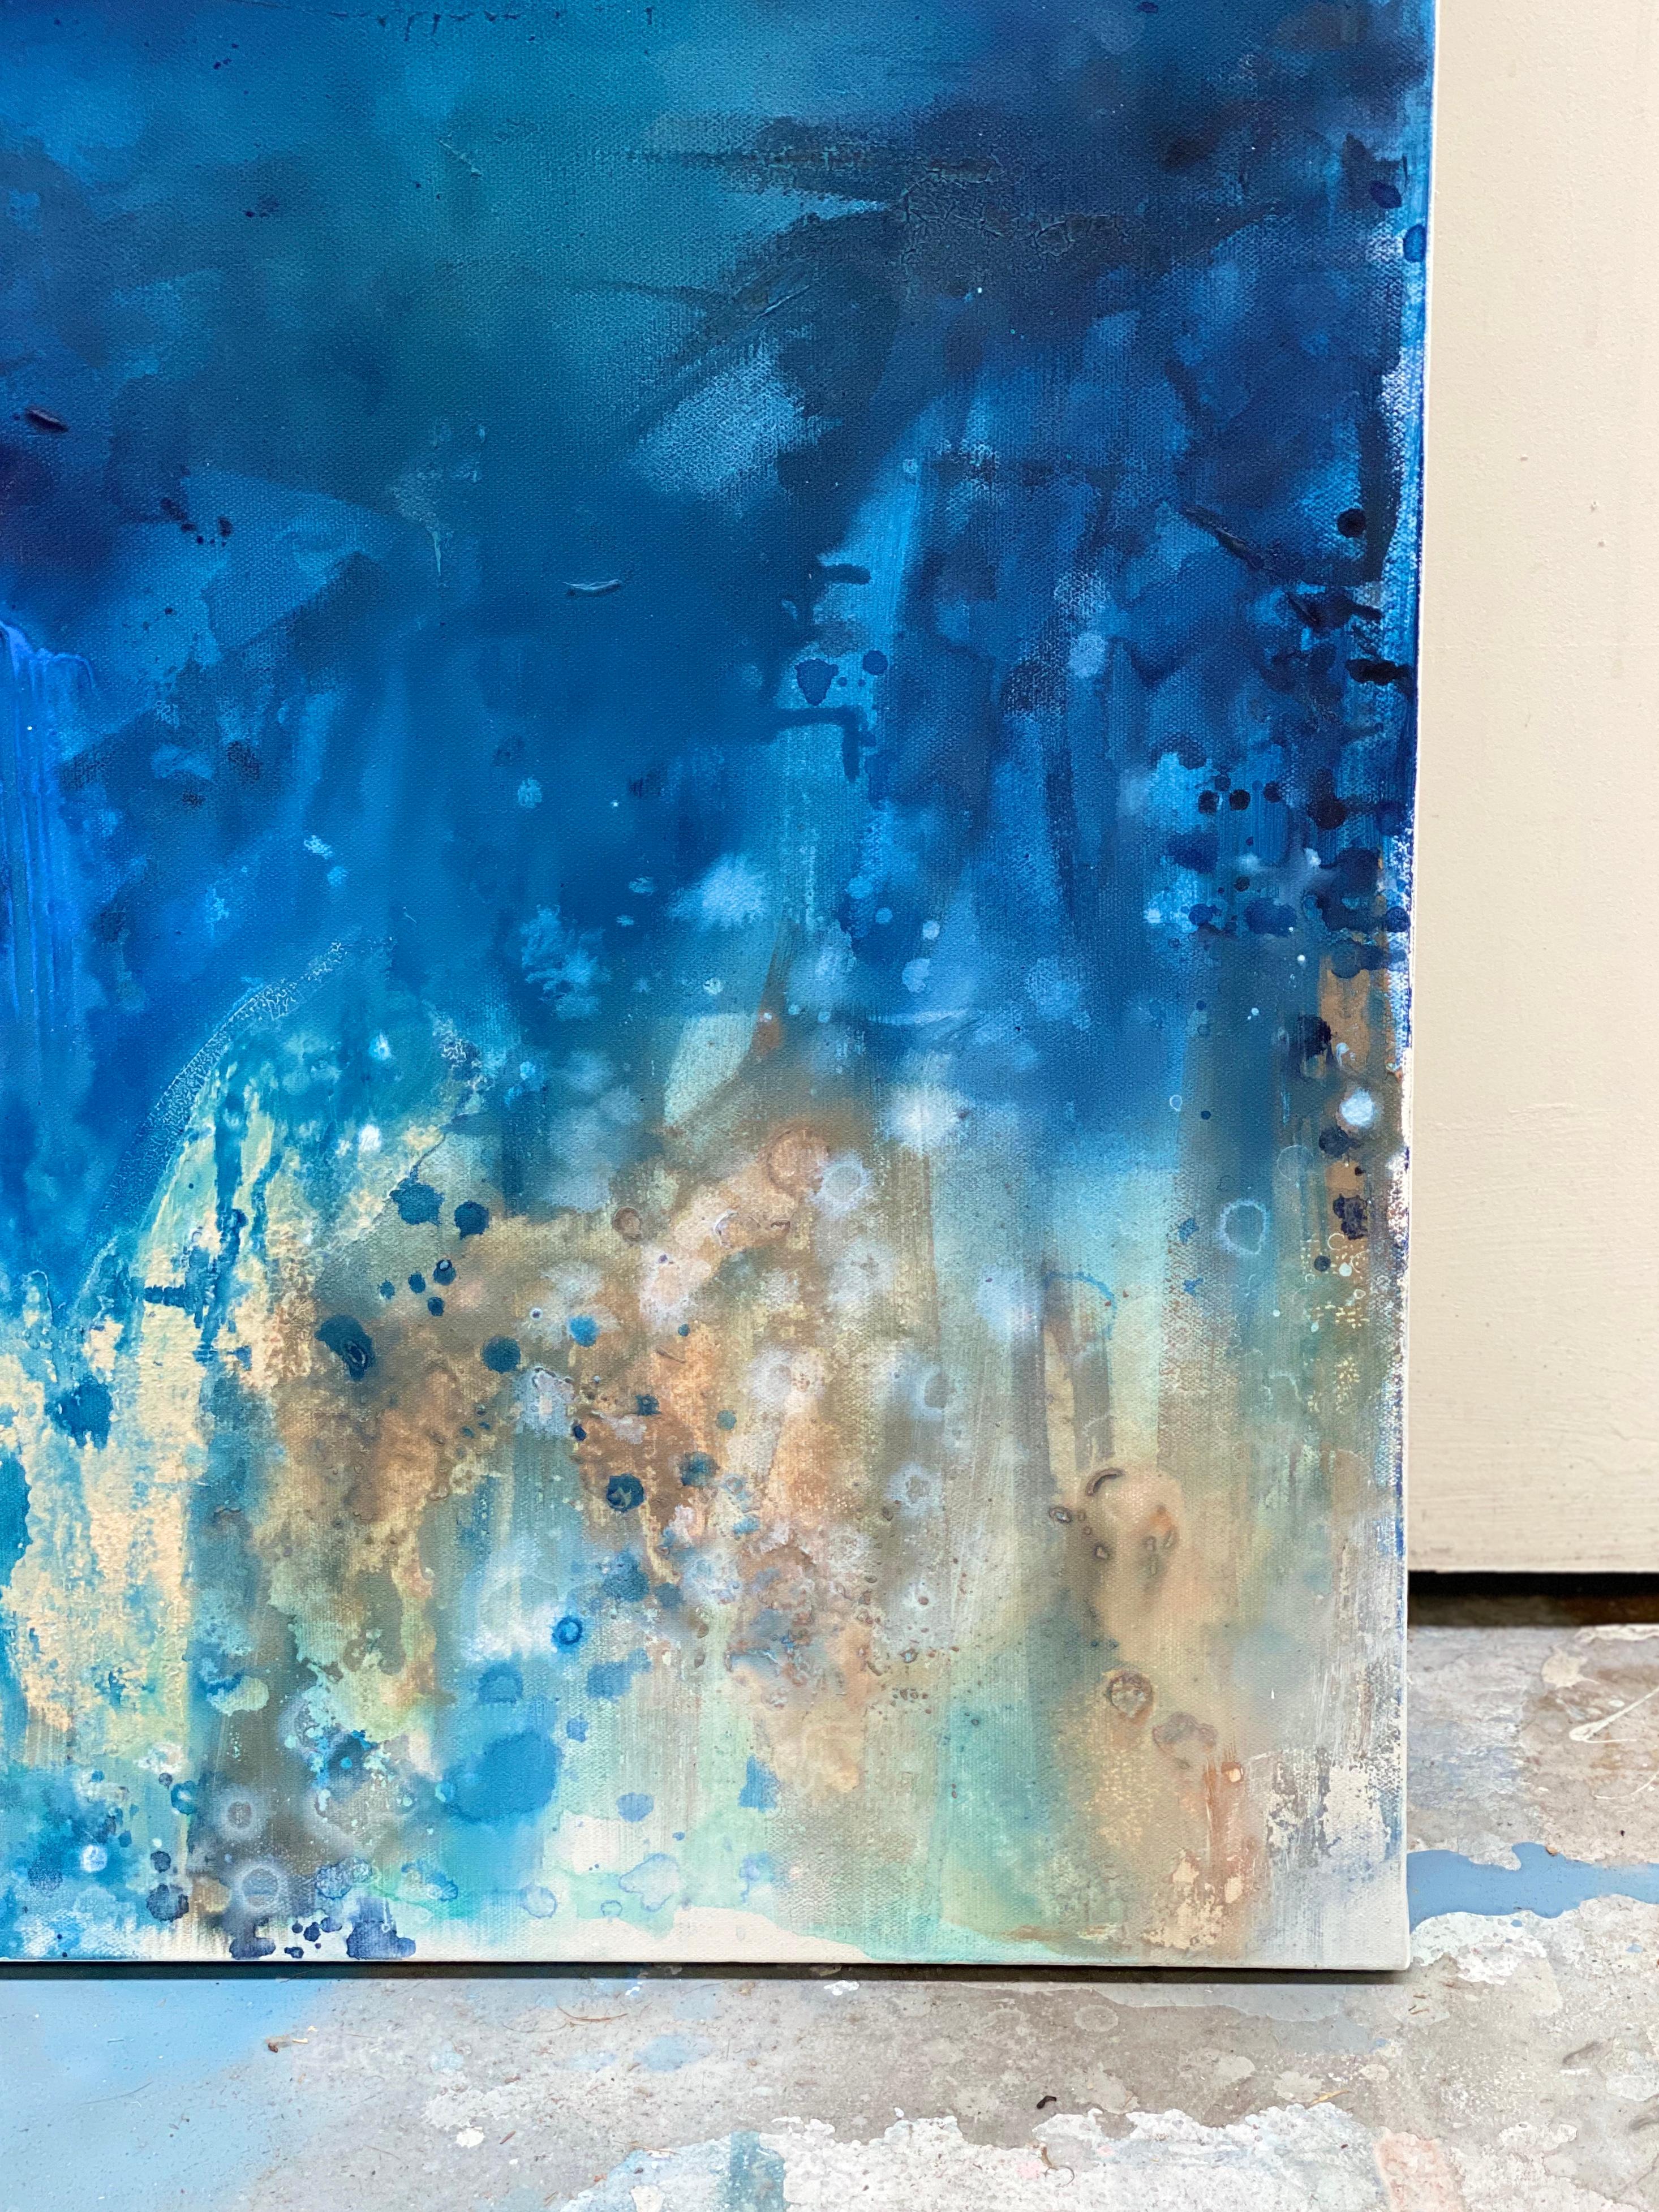 Bringing you brilliant Australian blue skies and sandy beach vibes in this abstract expressionist landscape. Soak up the radiating blue ocean energy, brighten your day and home. 
Bring the positive energy of the Australian surf and sunlight into you